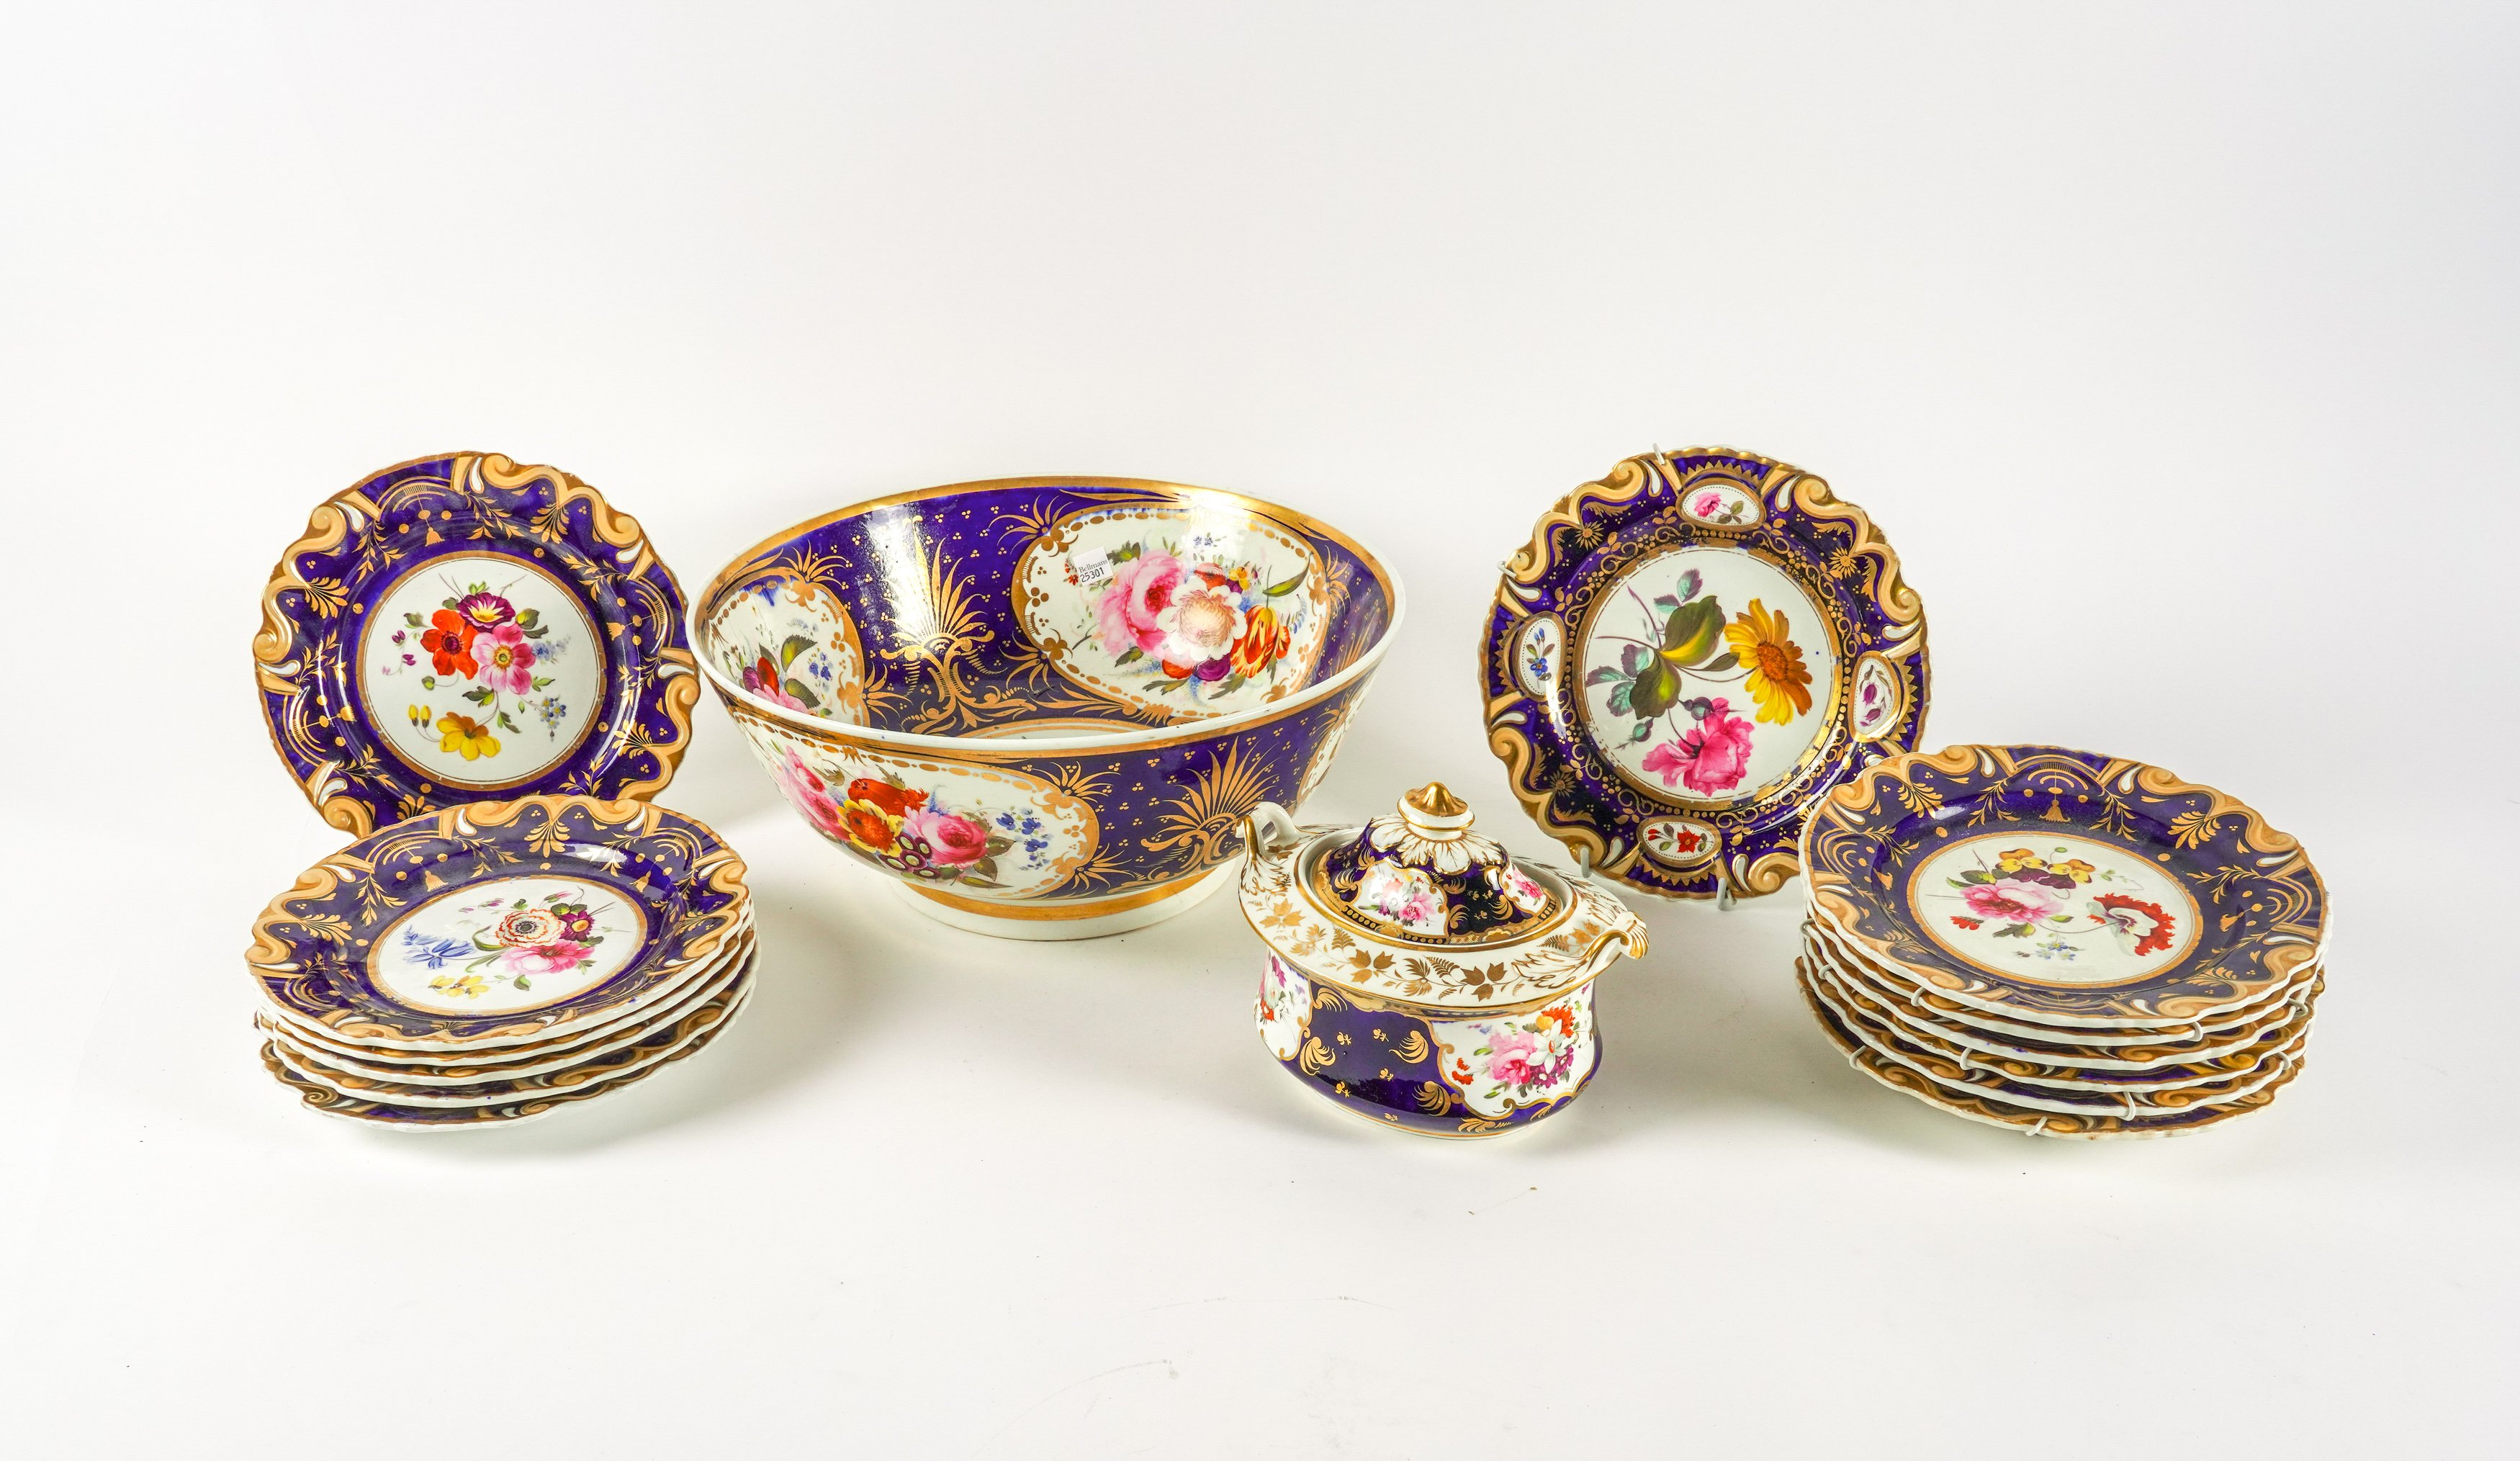 A GROUP OF ENGLISH BLUE-GROUND PORCELAINS PAINTED WITH FLOWERS (16)